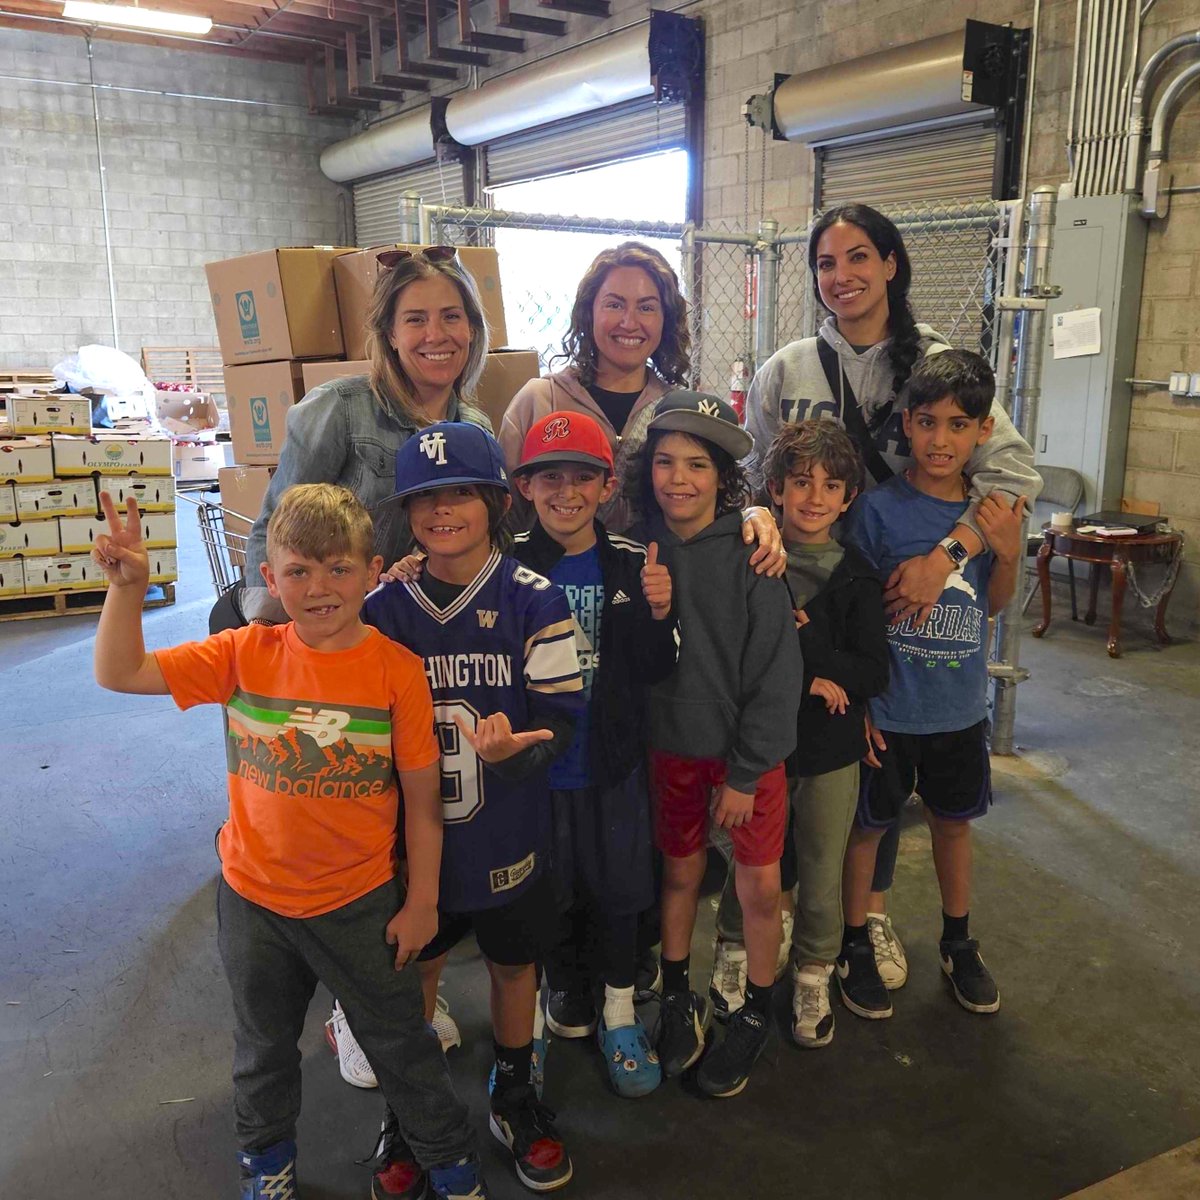 Westside Food Bank appreciates its amazing volunteers! Thank you to our latest helpers in the warehouse